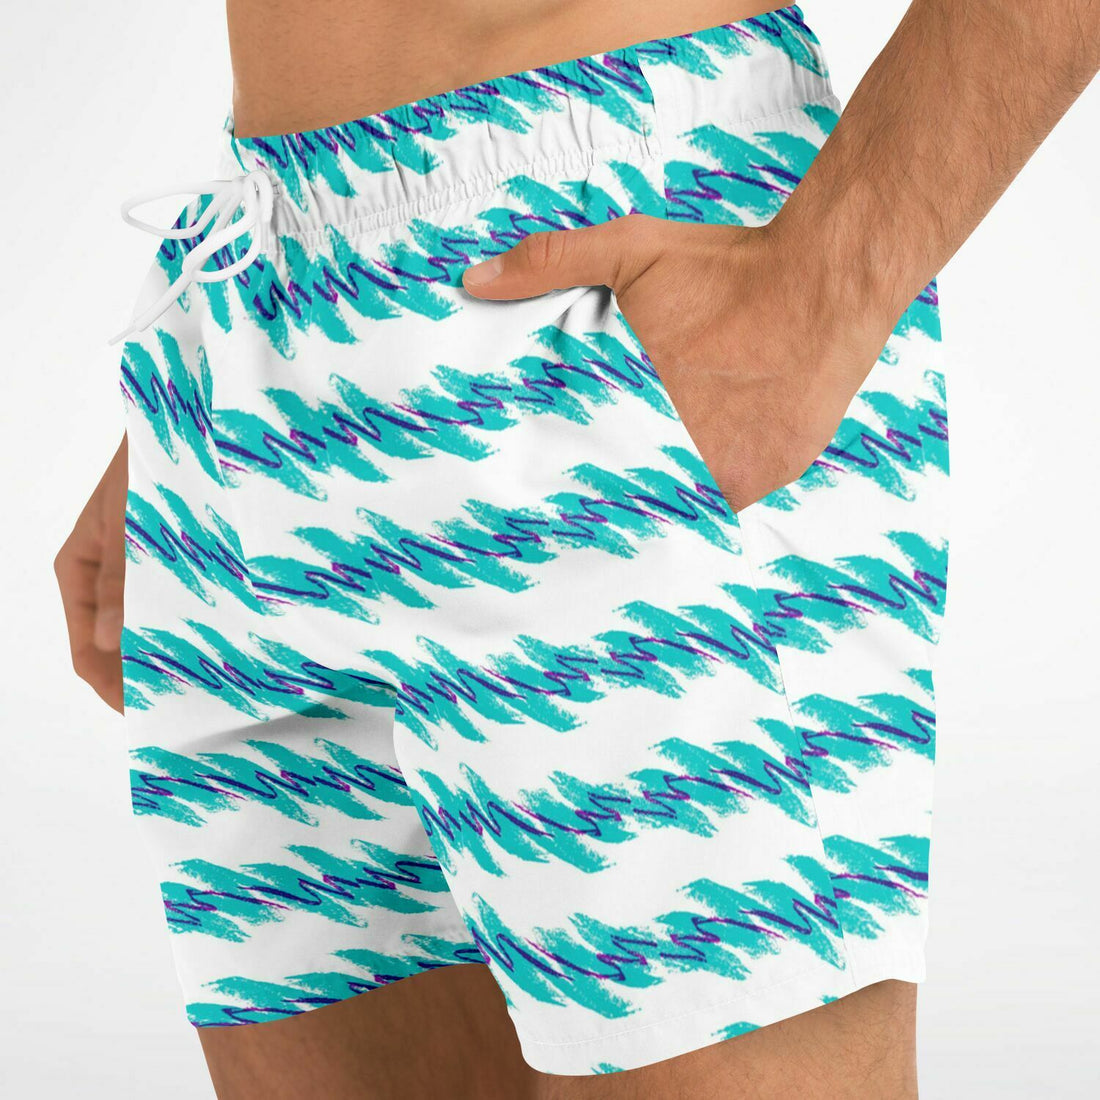 The superiority of Thread of State swim trunks compared to Quiksilver